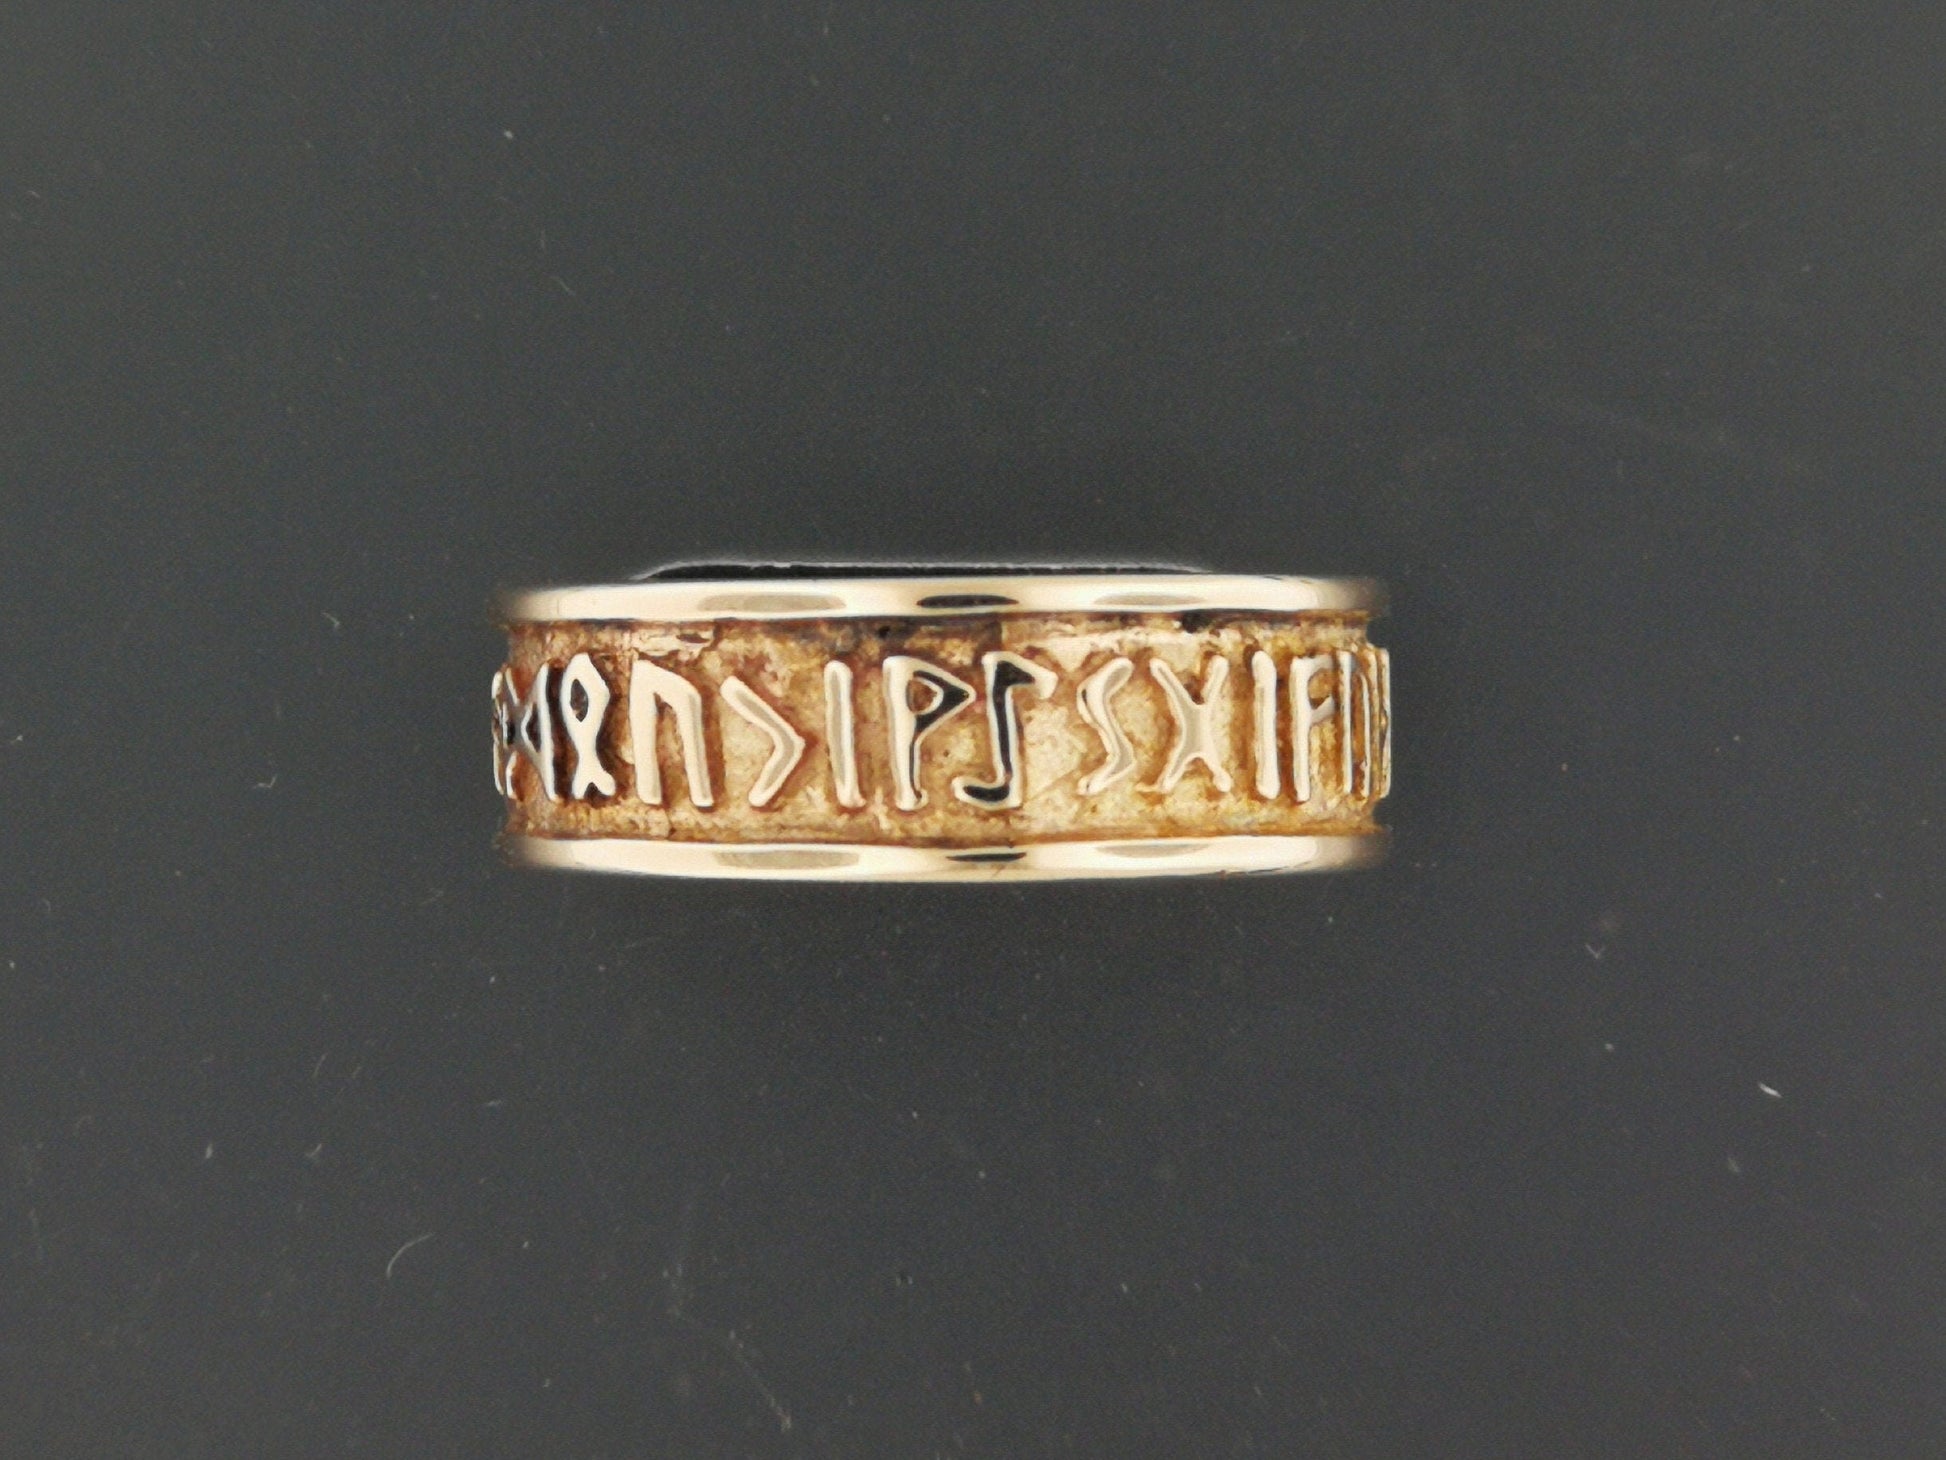 Norse Rune Band in Sterling Silver or Antique Bronze, Runic Alphabet Ring, Bronze Viking Ring, Bronze Rune Ring, Antique Bronze Rune Ring, Antique Bronze Rune Band Ring, Viking Rune Ring, Nordic Bronze Band, Elder Futhark Antique Bronze Ring